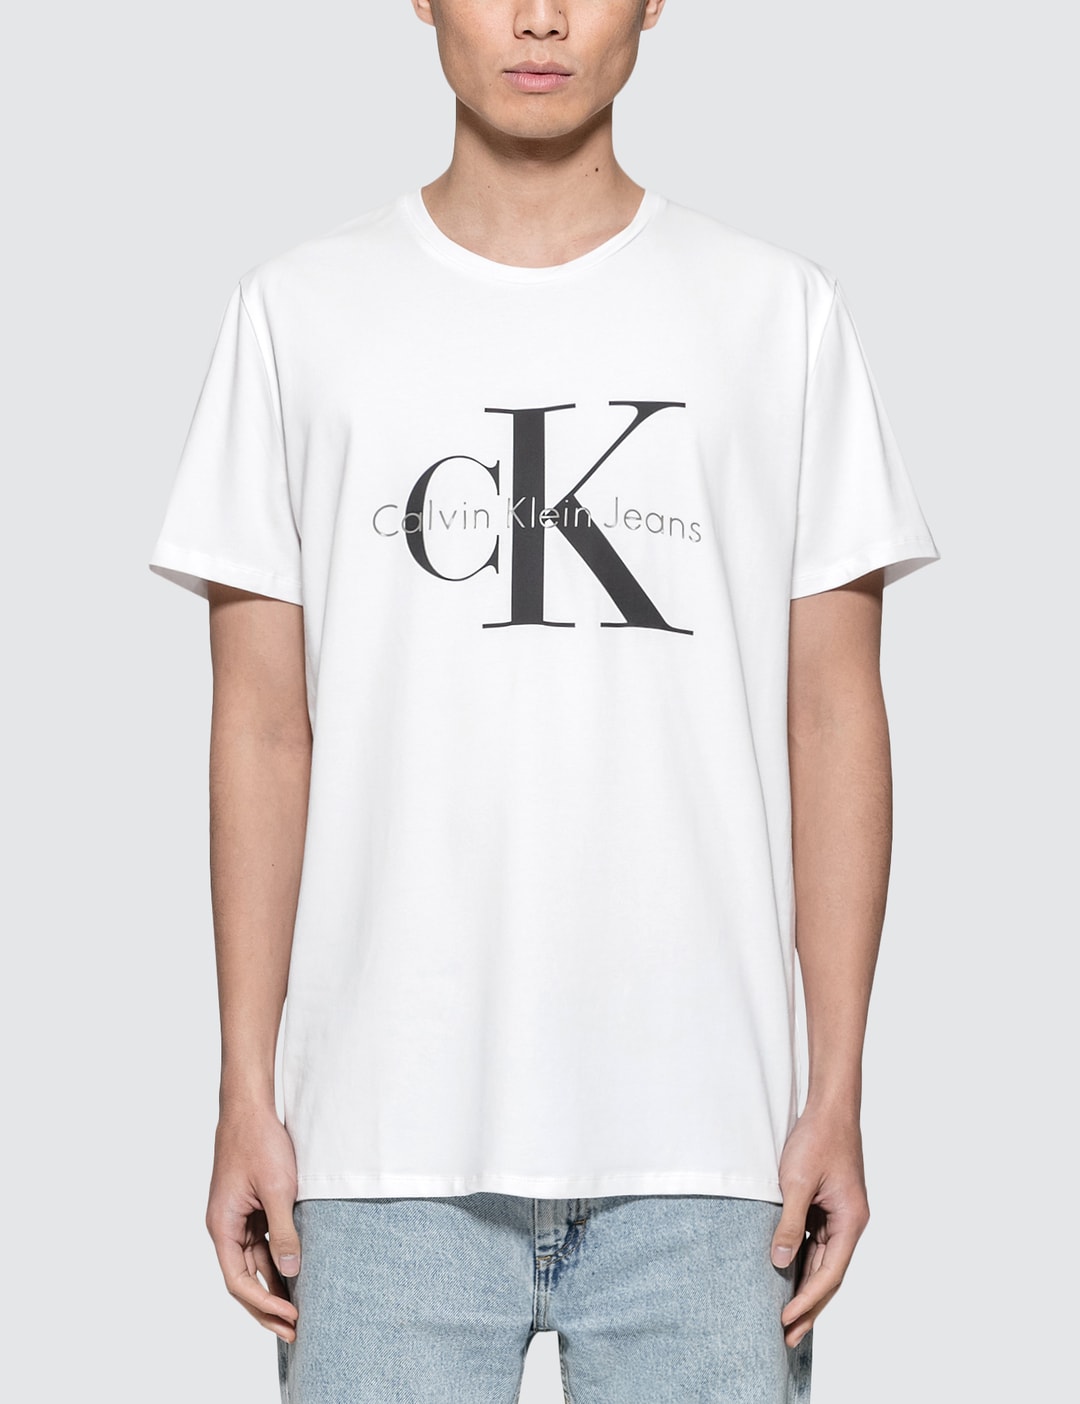 Jeans Calvin - CK HBX Lifestyle by Fashion Slim Logo Hypebeast Curated T-Shirt - and Globally | Klein S/S